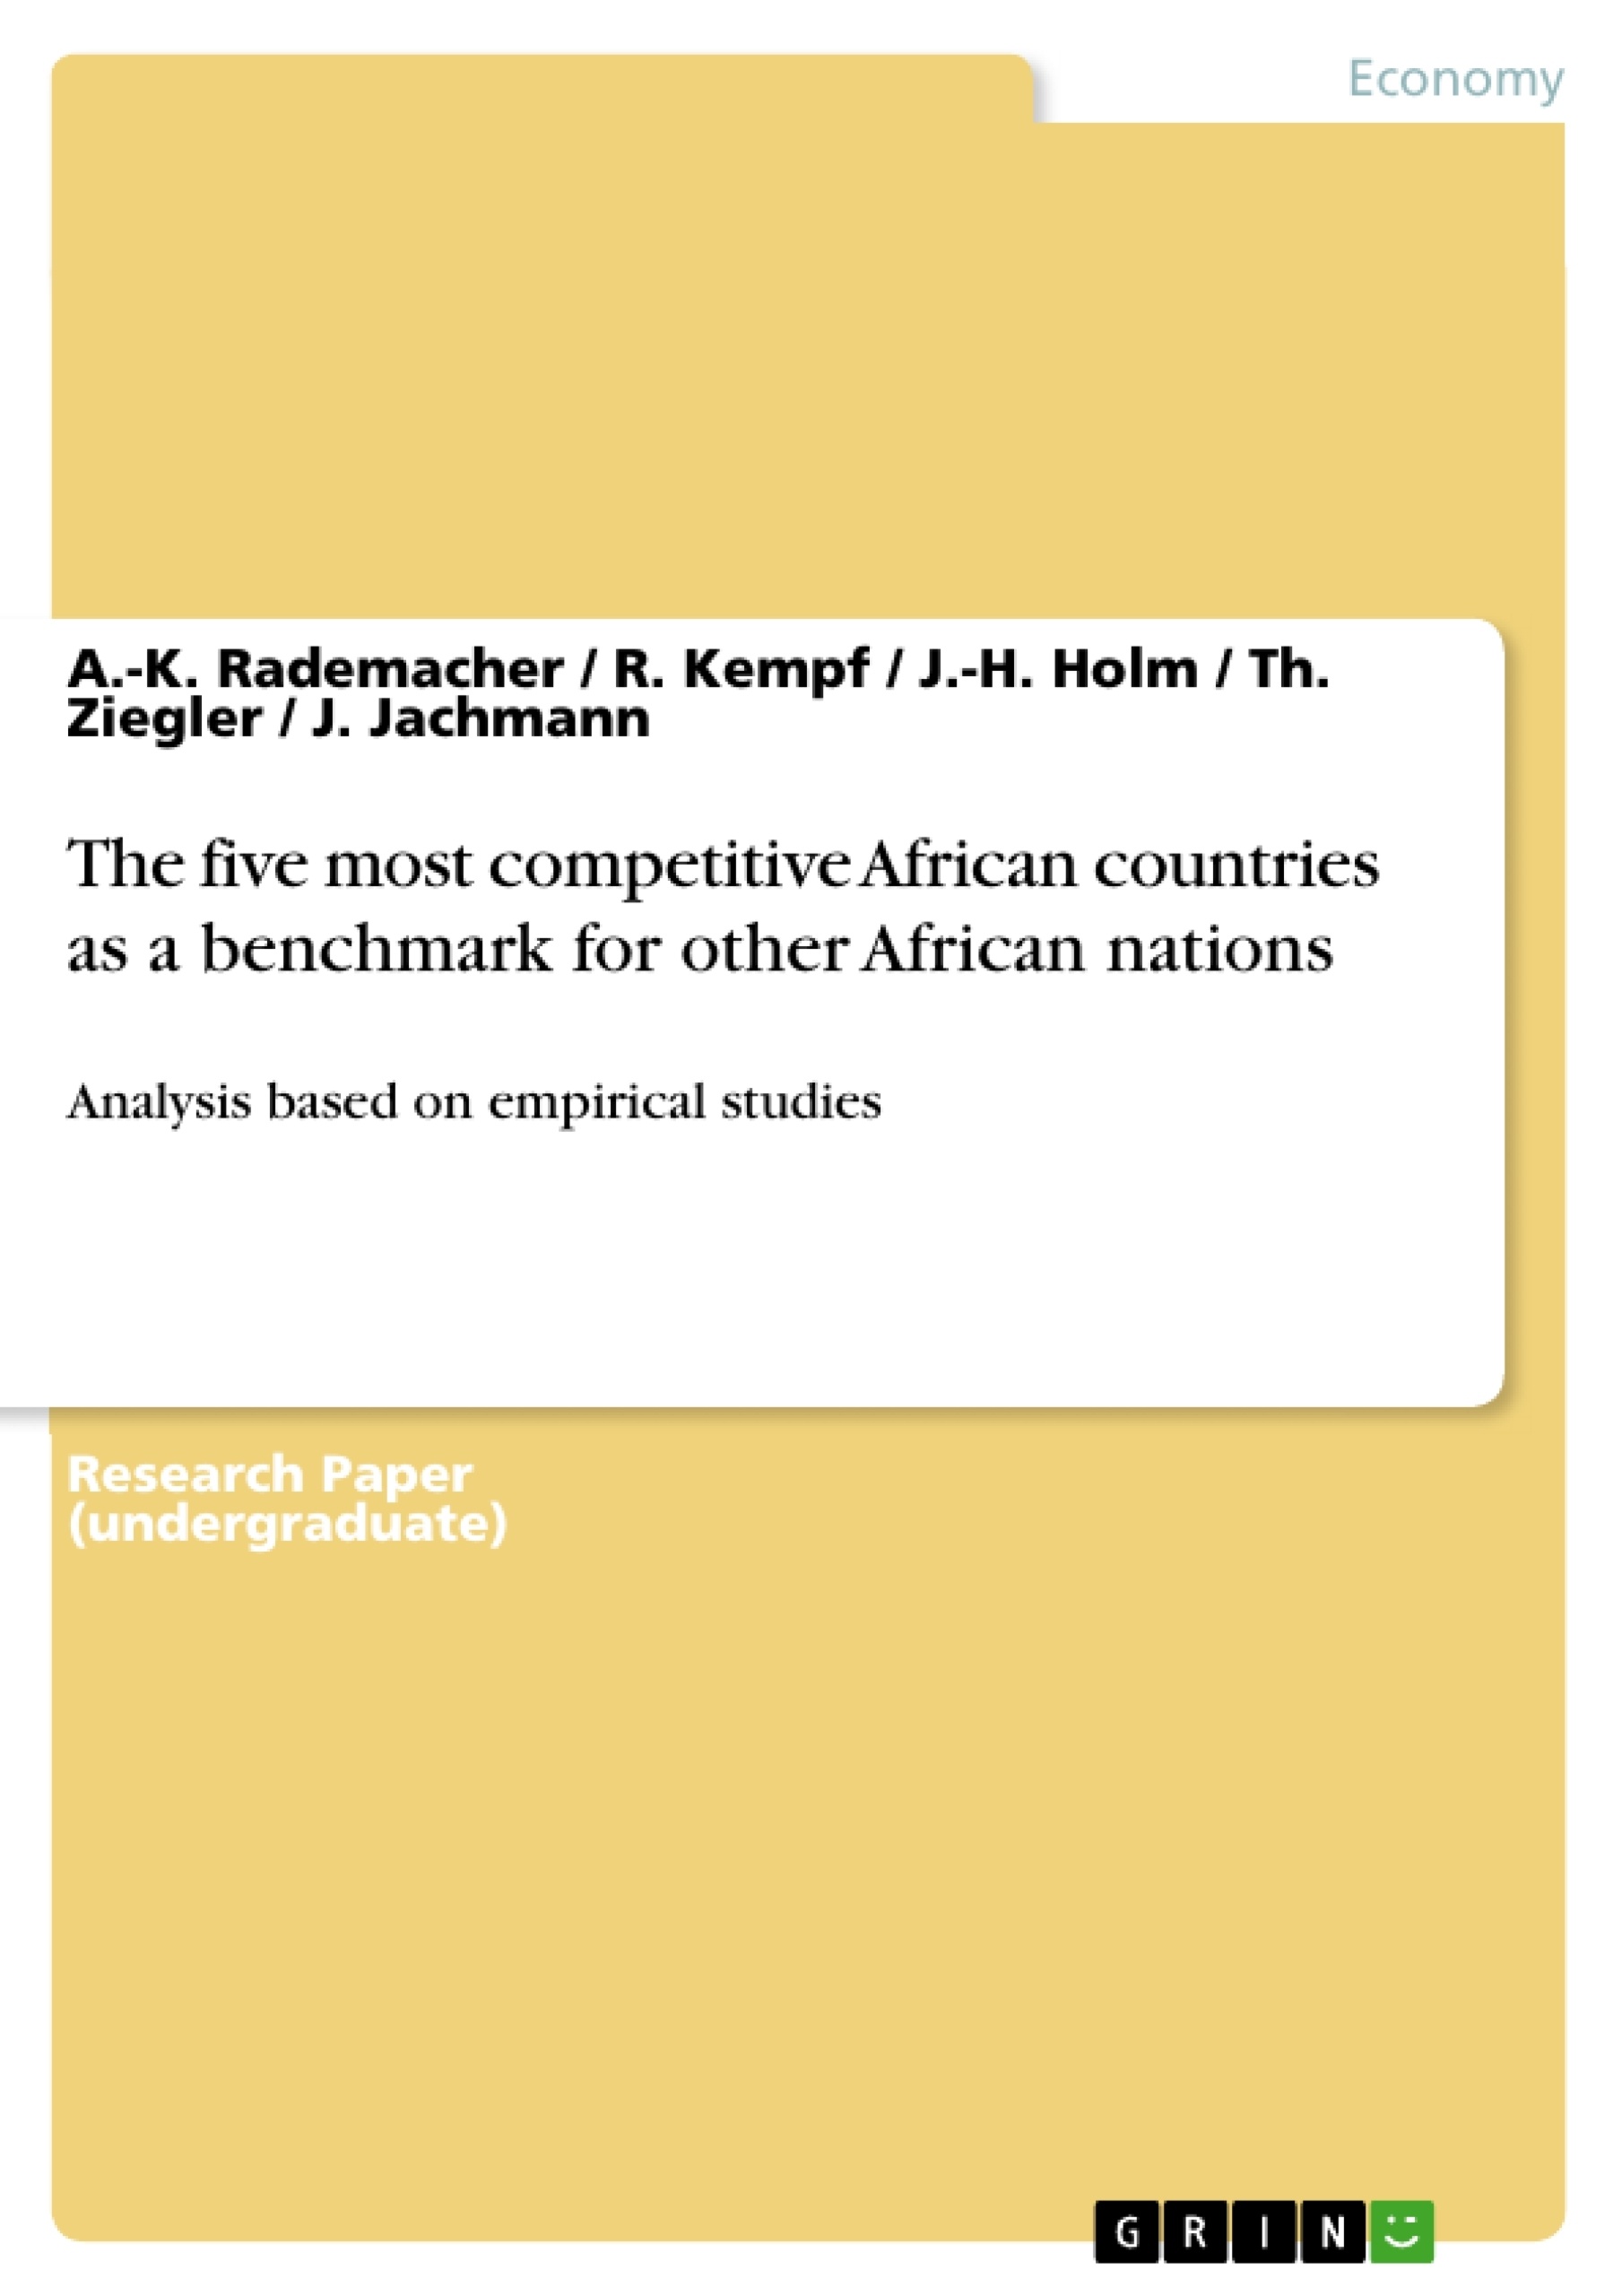 Titel: The five most competitive African countries as a benchmark for other African nations